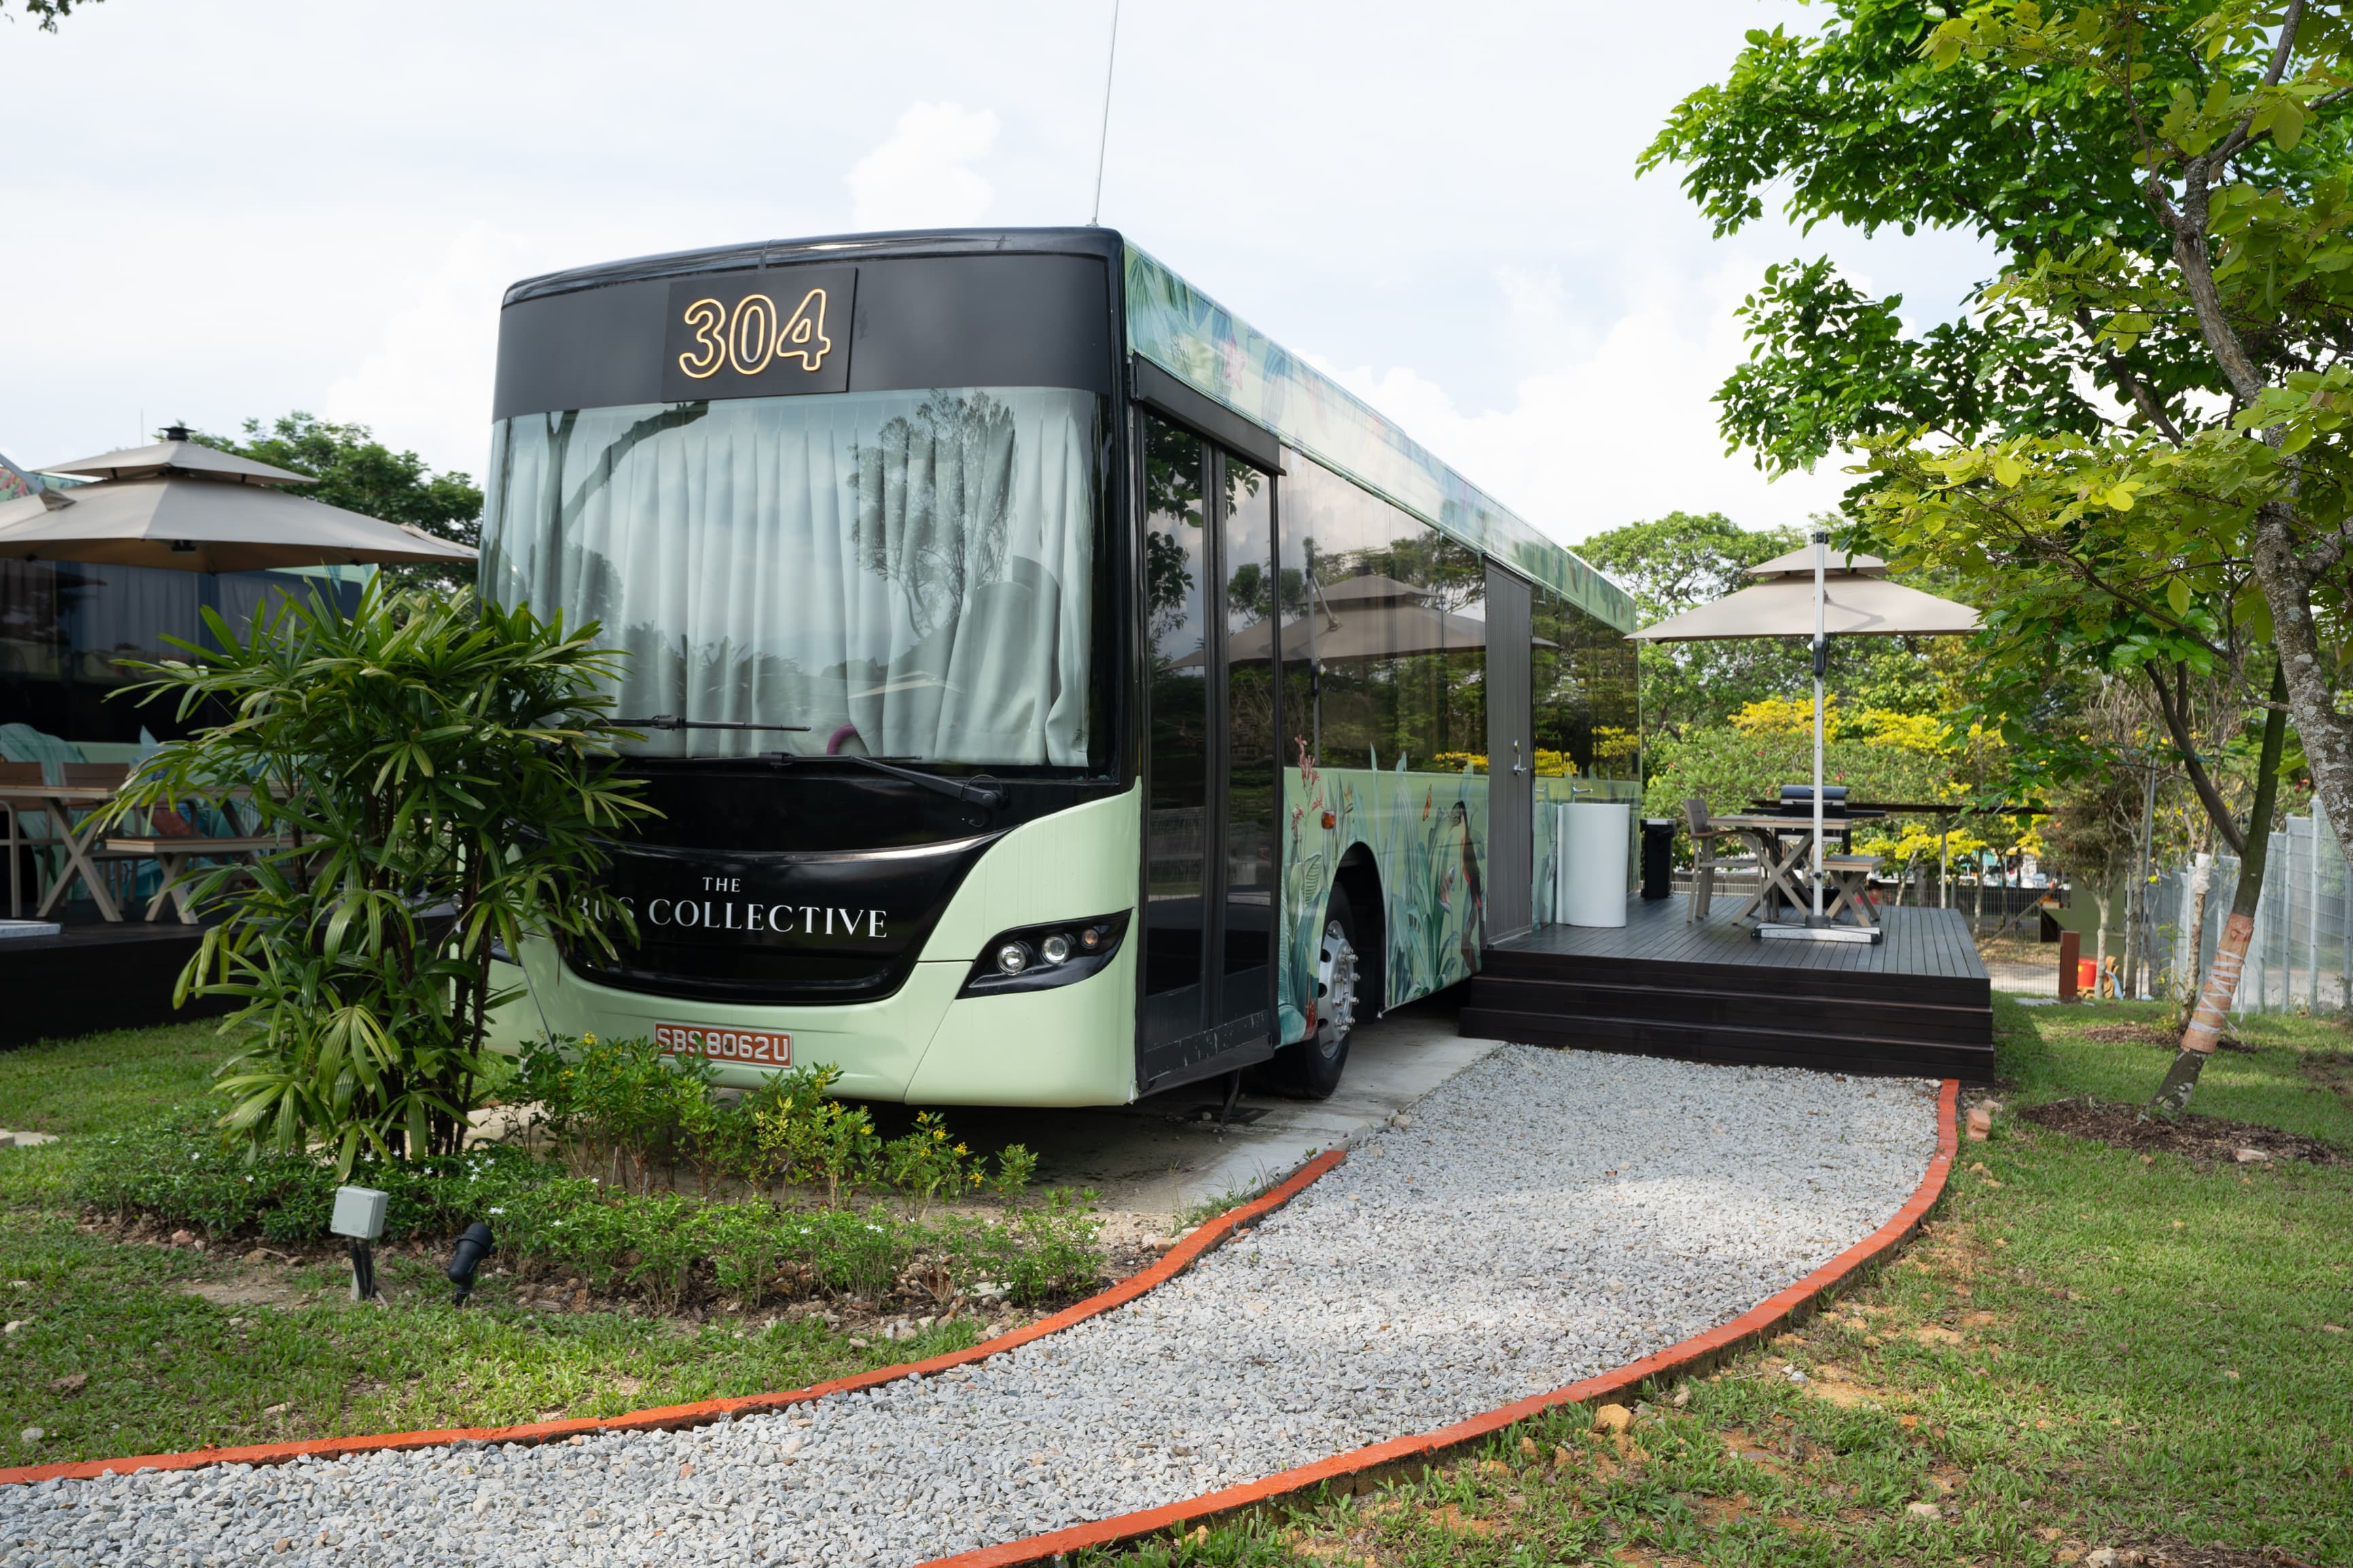 A brand new luxurious resort with rooms produced from buses opens in Singapore